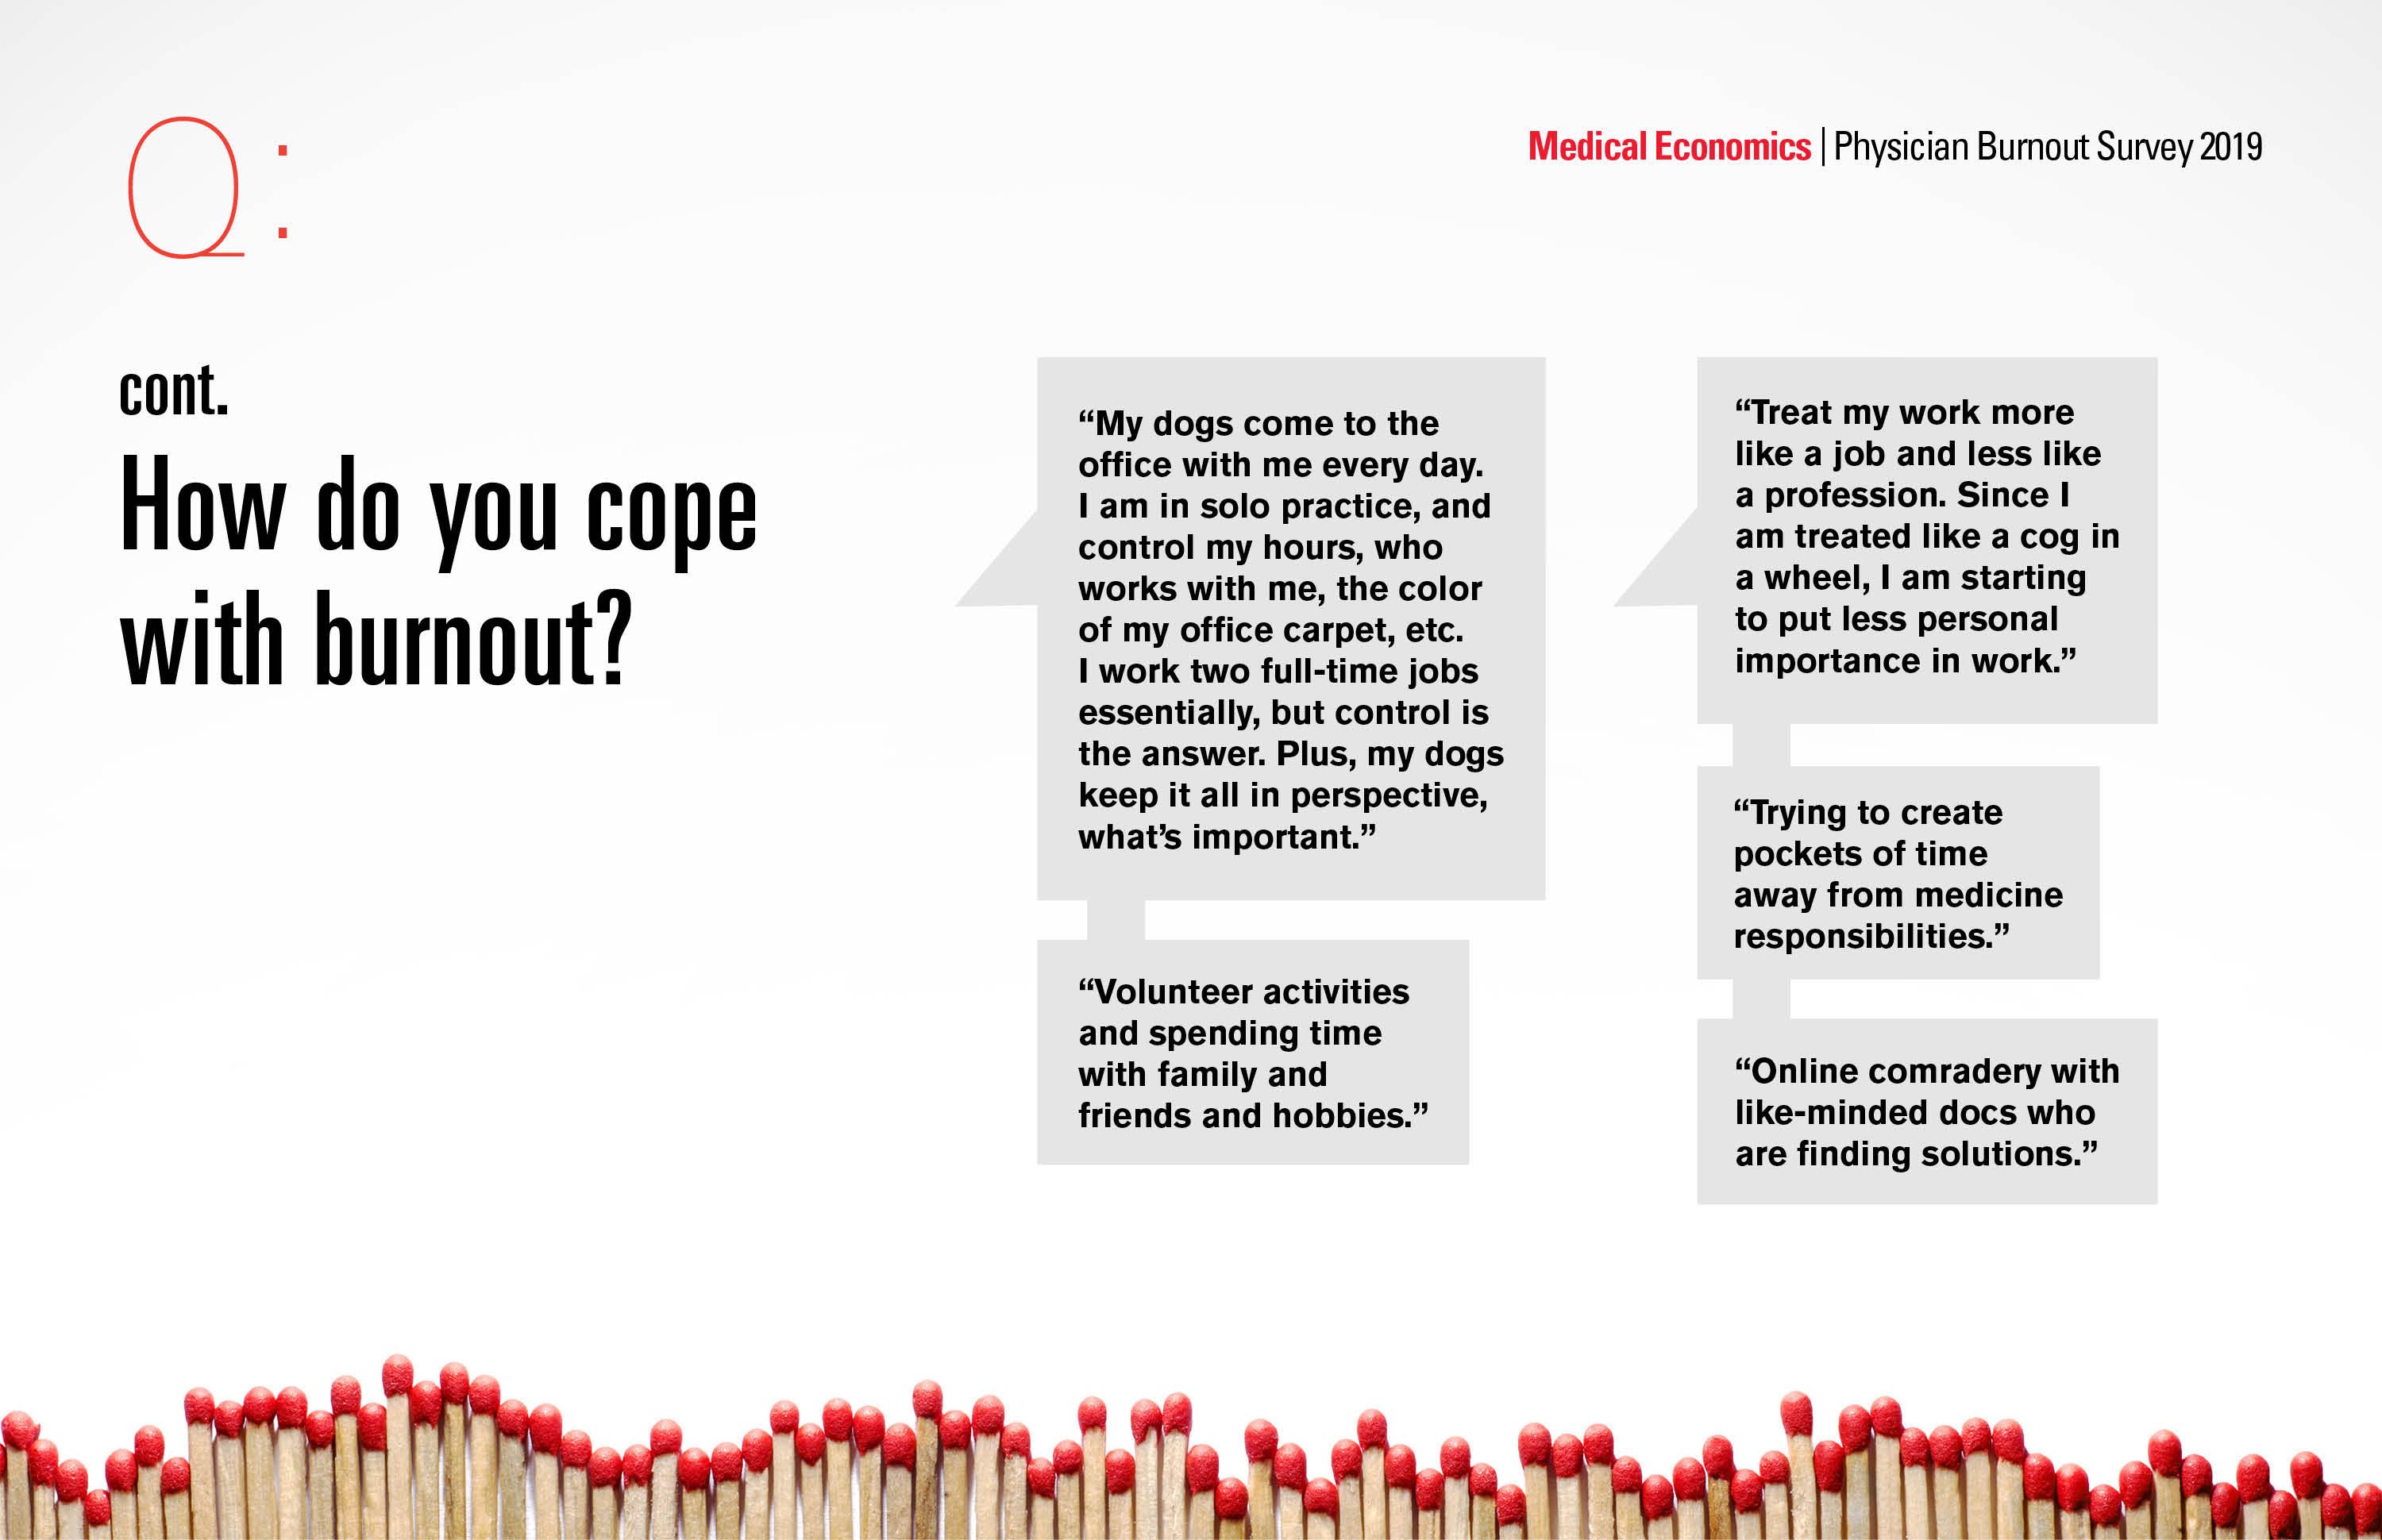 Cont. How do you cope with burnout? 